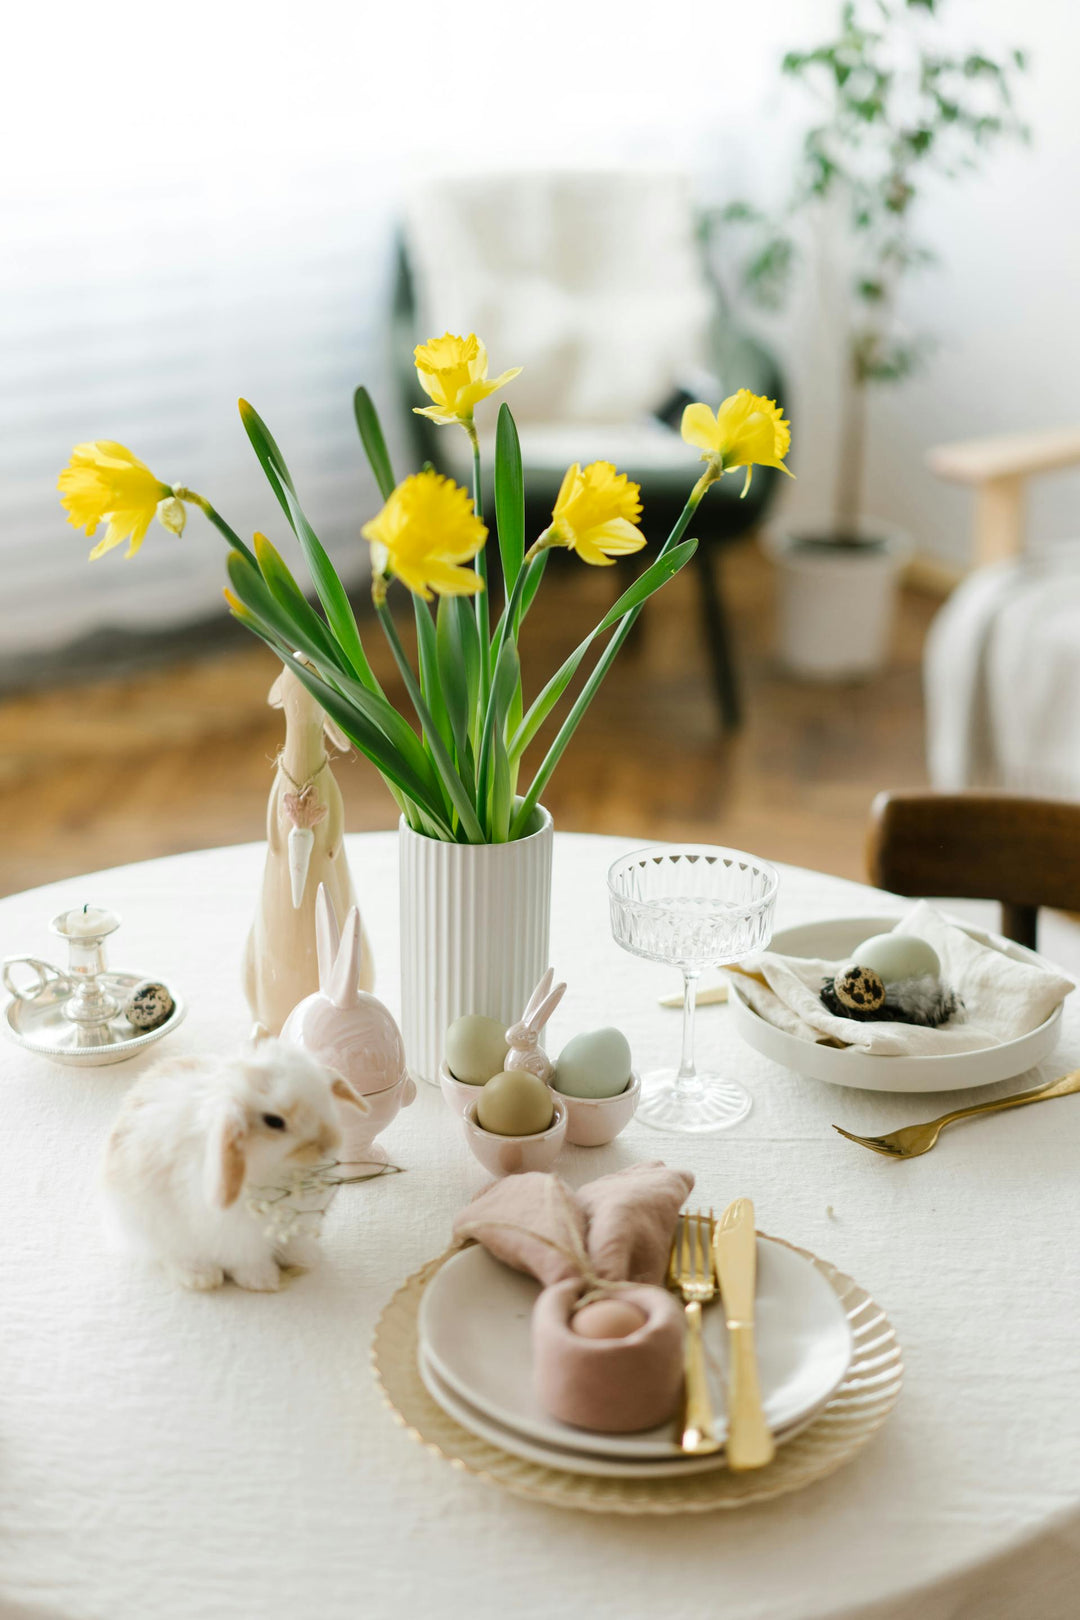 Embrace Spring with Fresh Furnishings from Furnitrends